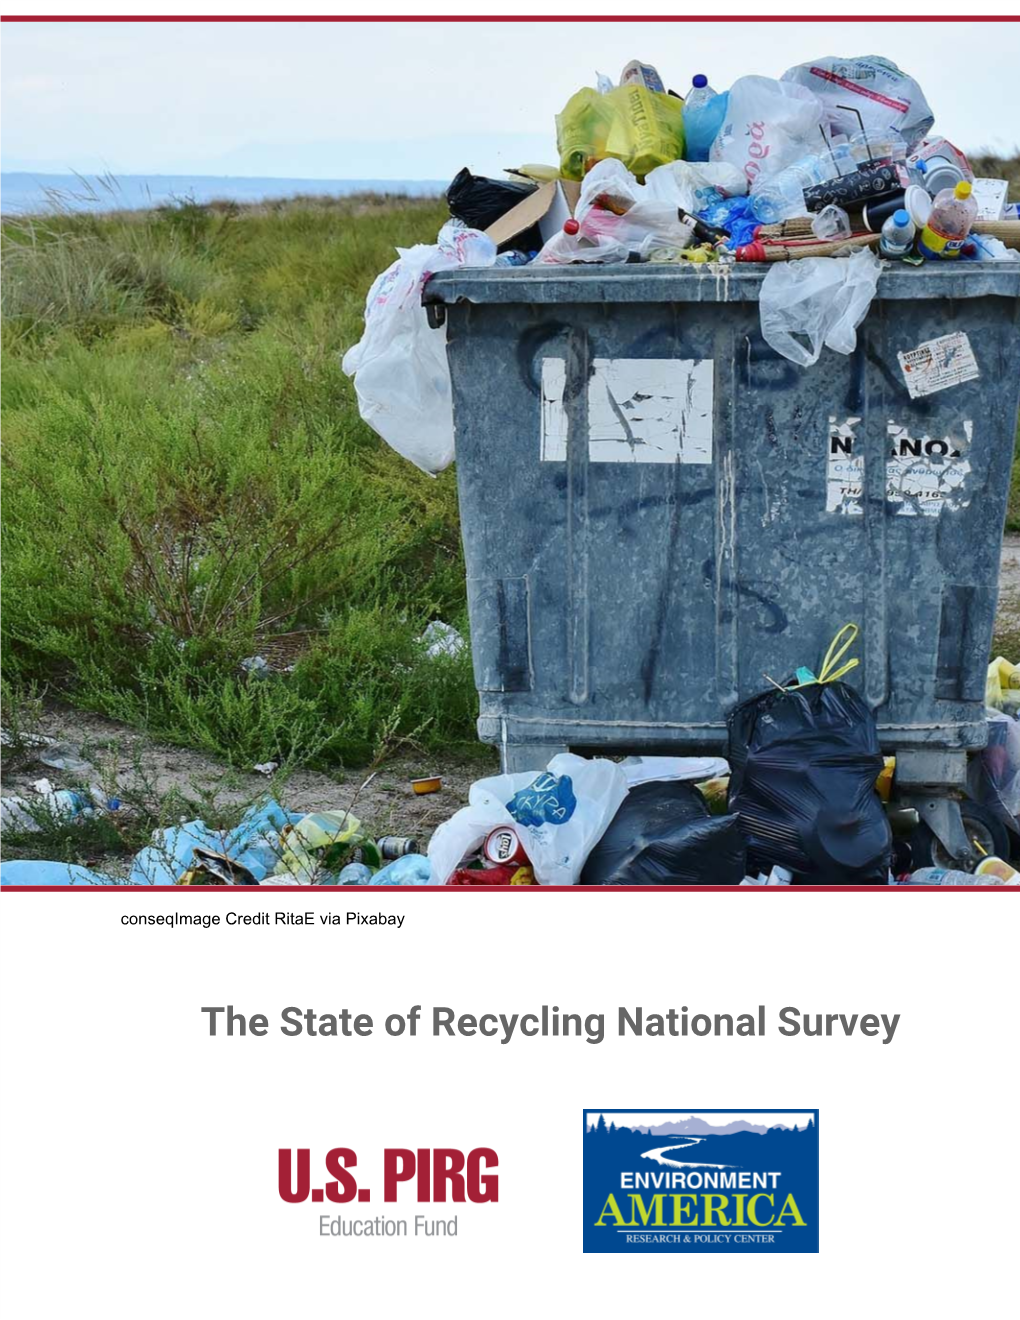 The State of Recycling National Survey